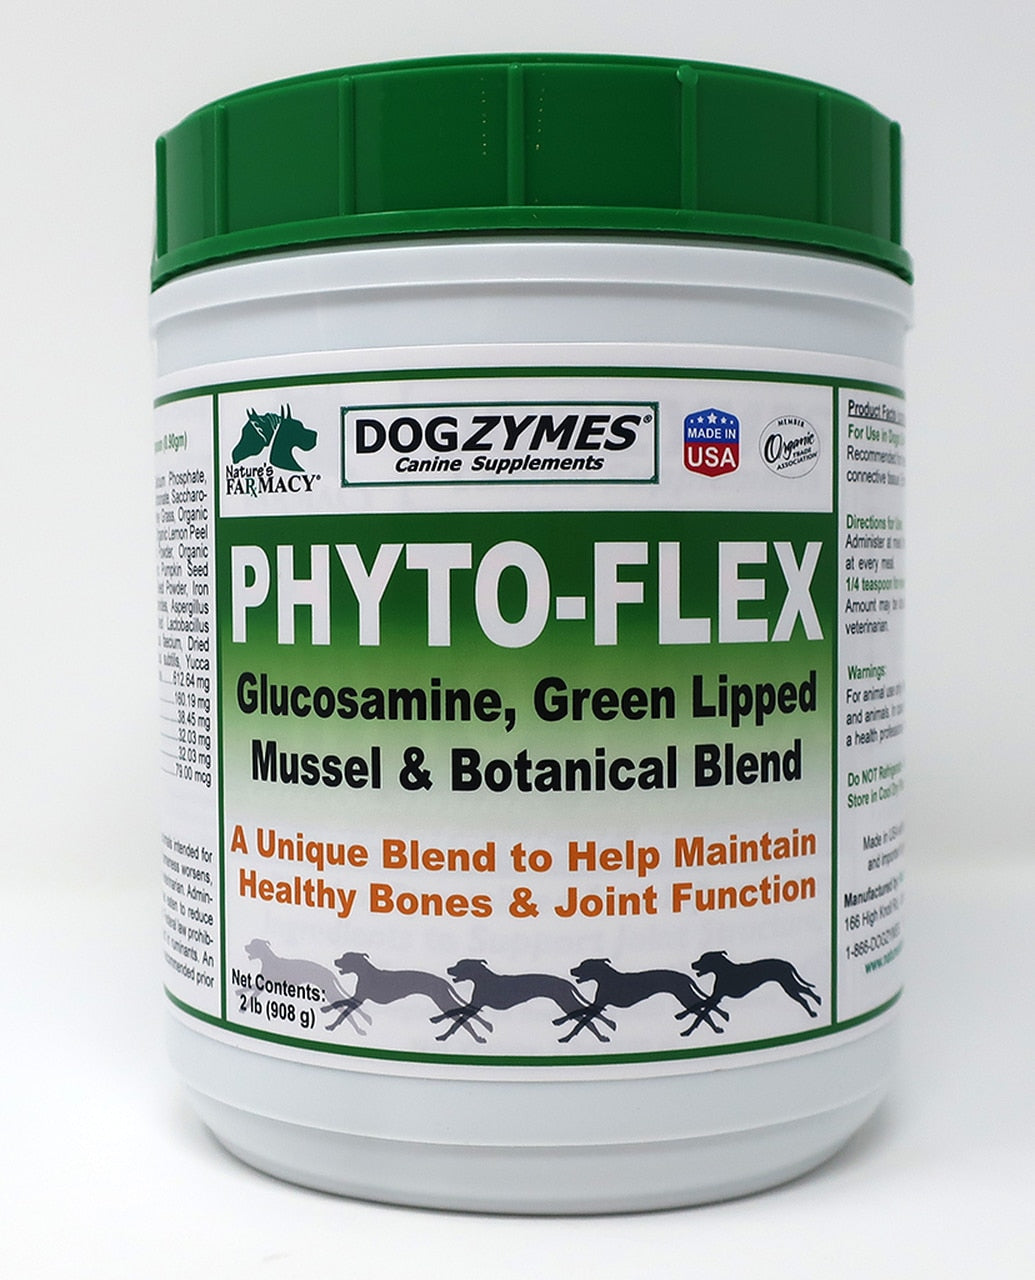 Nature's Farmacy Dogzymes Phyto Flex Supplement For Dogs